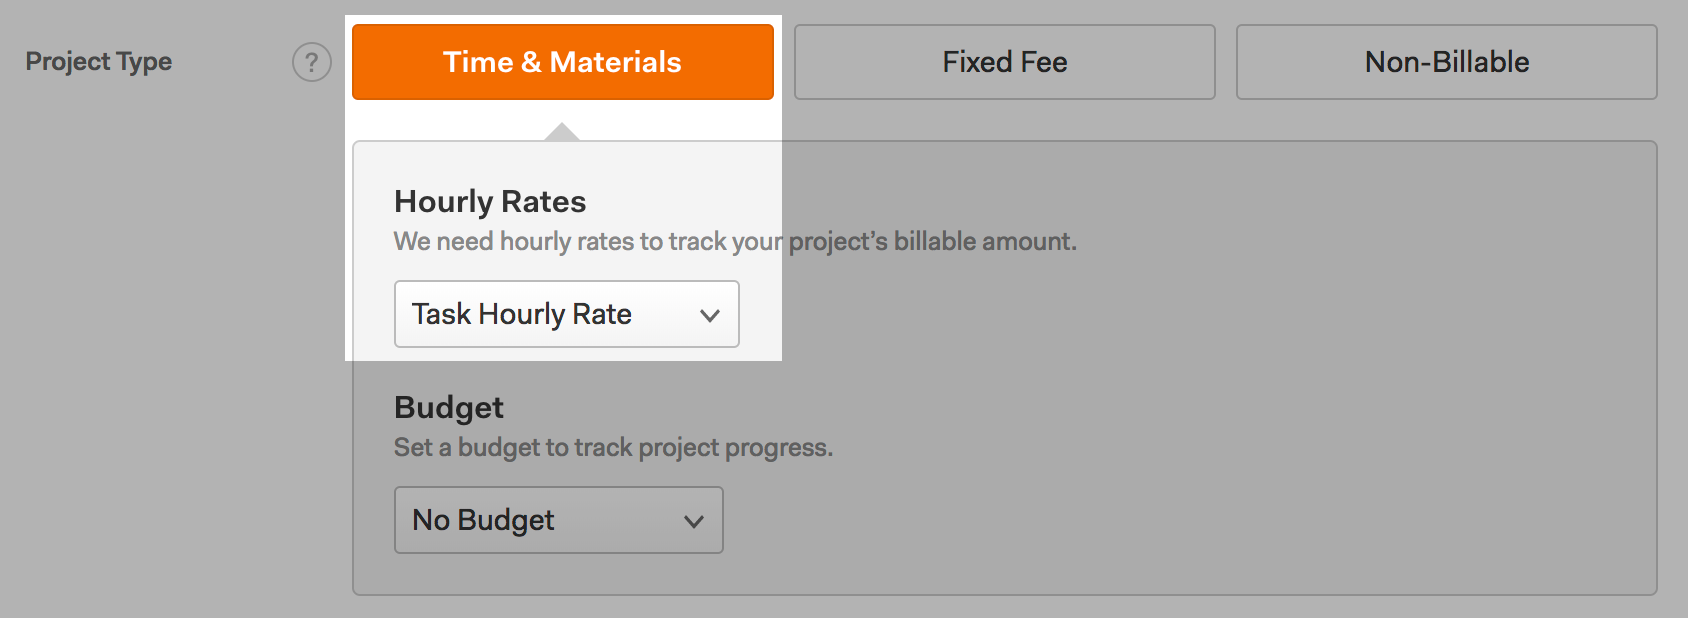 Screenshot of the New/Edit Project page for a Time & Materials project with the Task Hourly Rate billing method selected